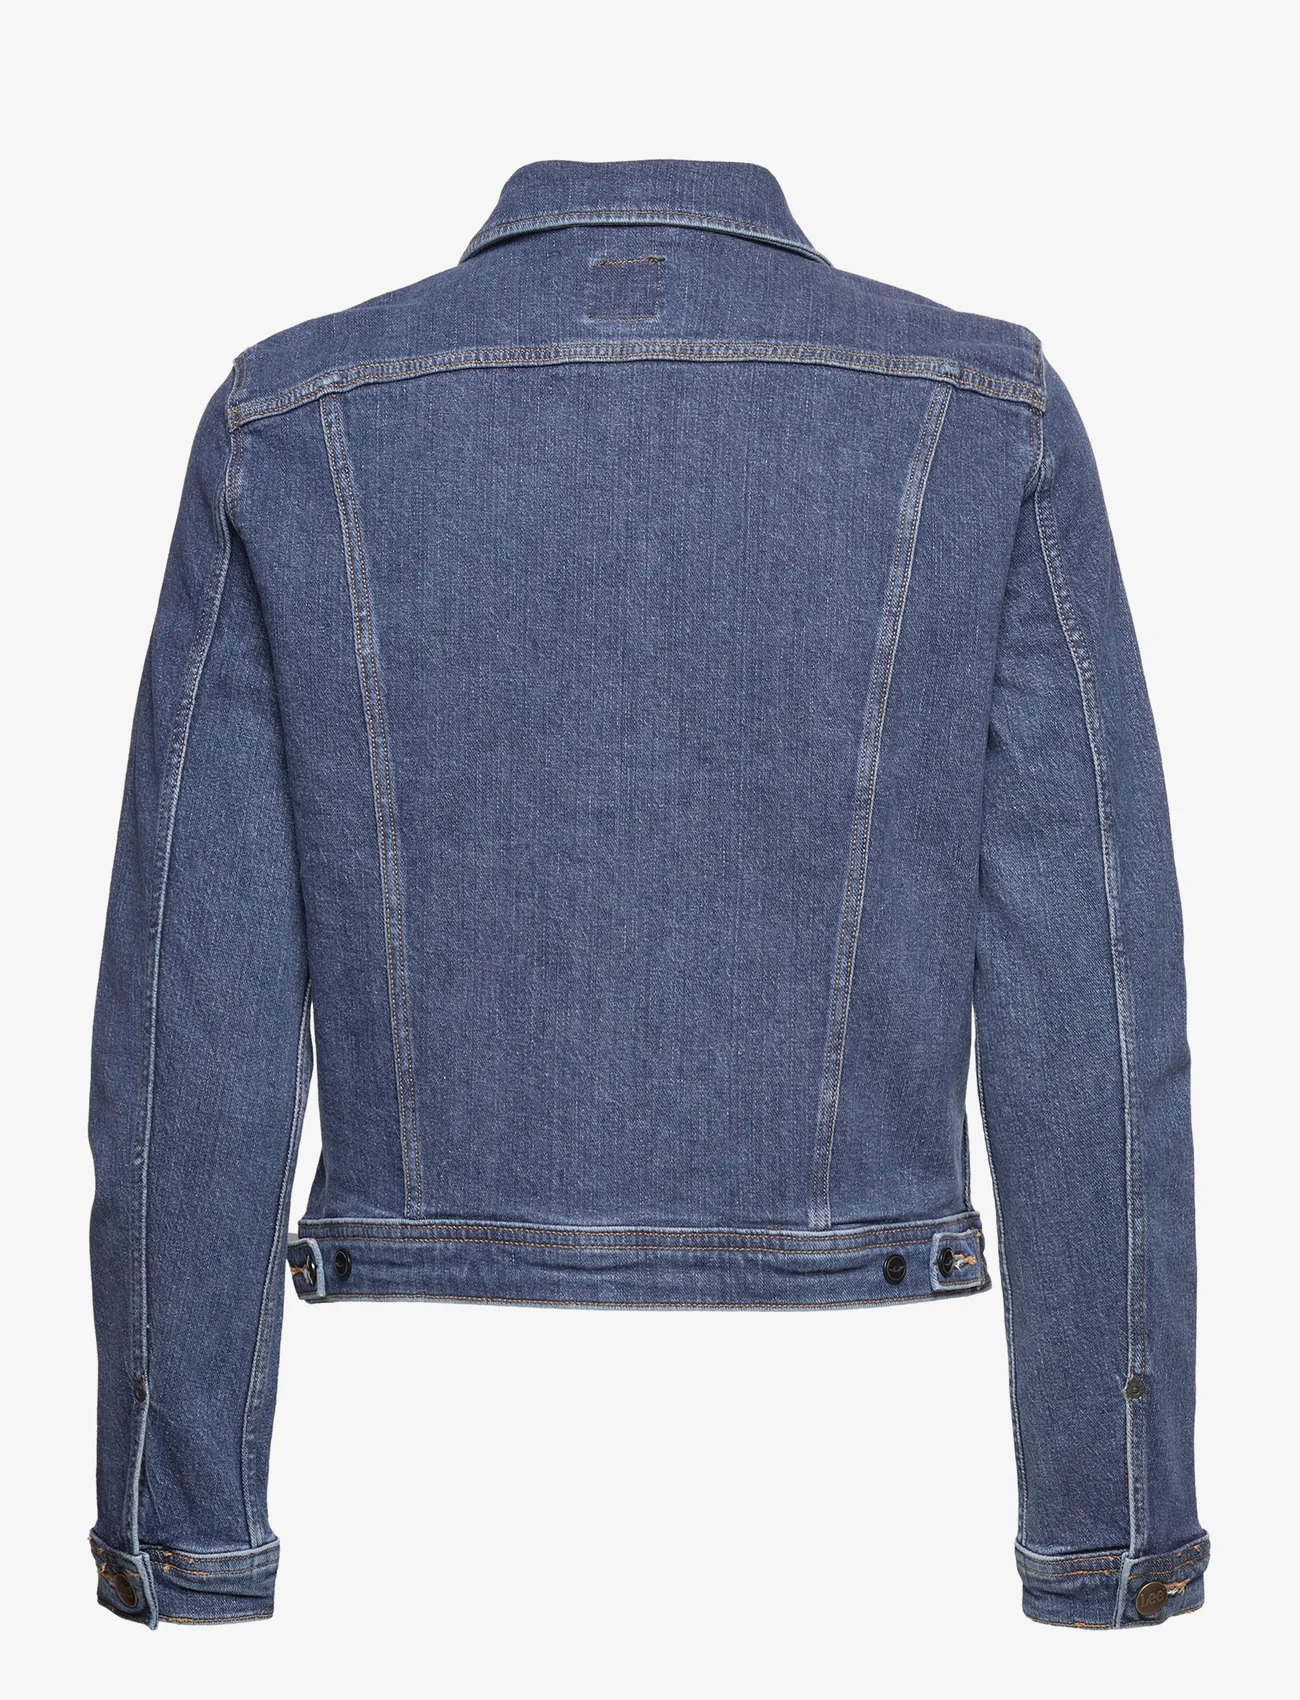 Lee Jeans Rider Jacket  €. Buy Denim jackets from Lee Jeans online  at . Fast delivery and easy returns